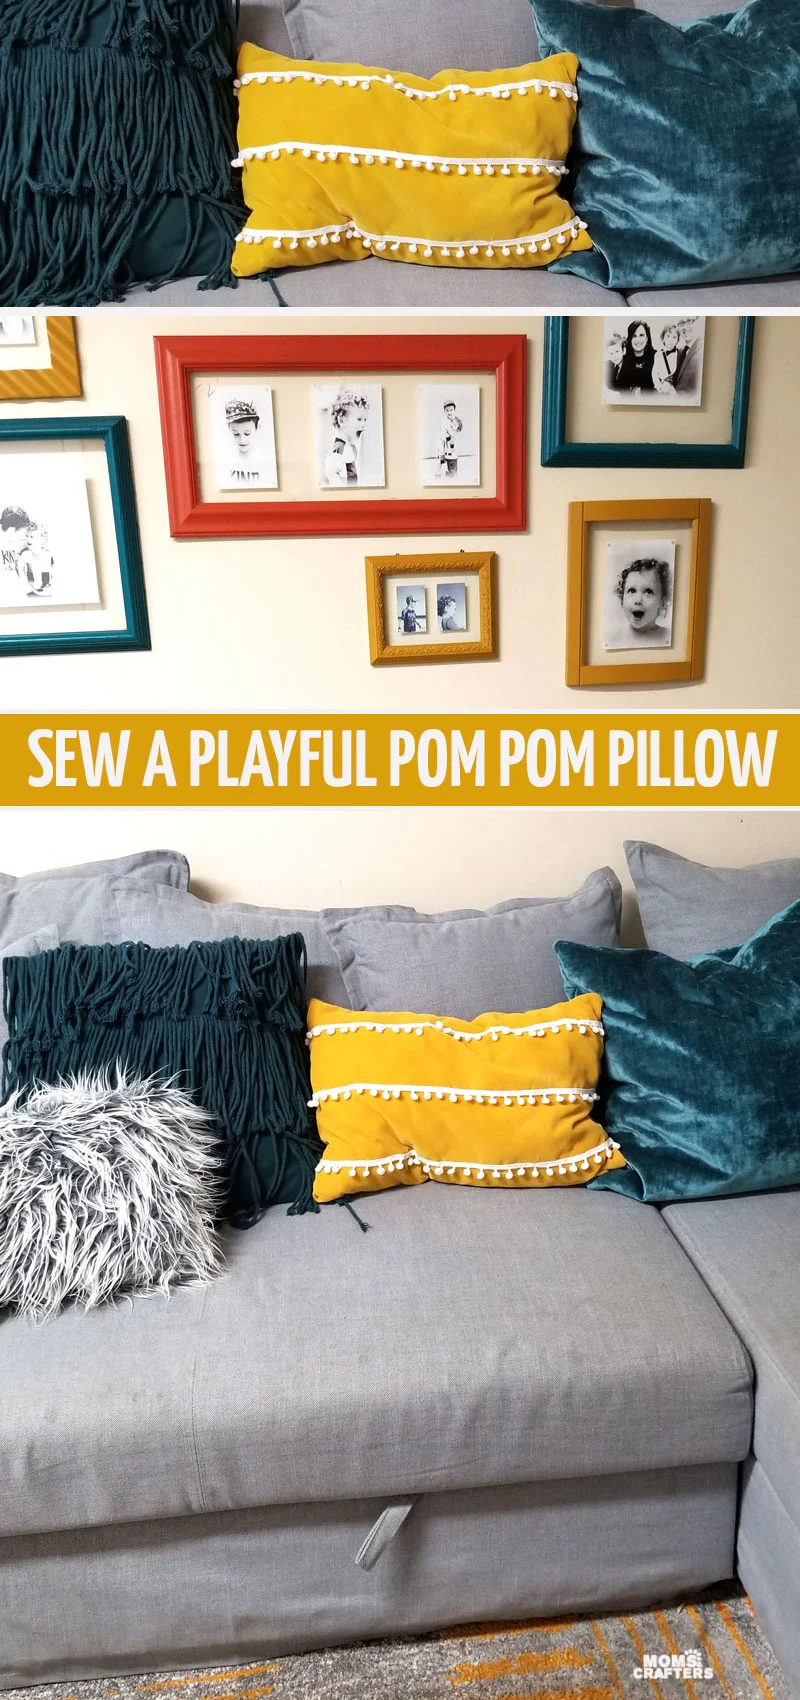 Click to learn how to sew a DIY pom pom pillow or throw cushion for the living room or family room couch! This easy tutorial for beginners is colorful and playful. 